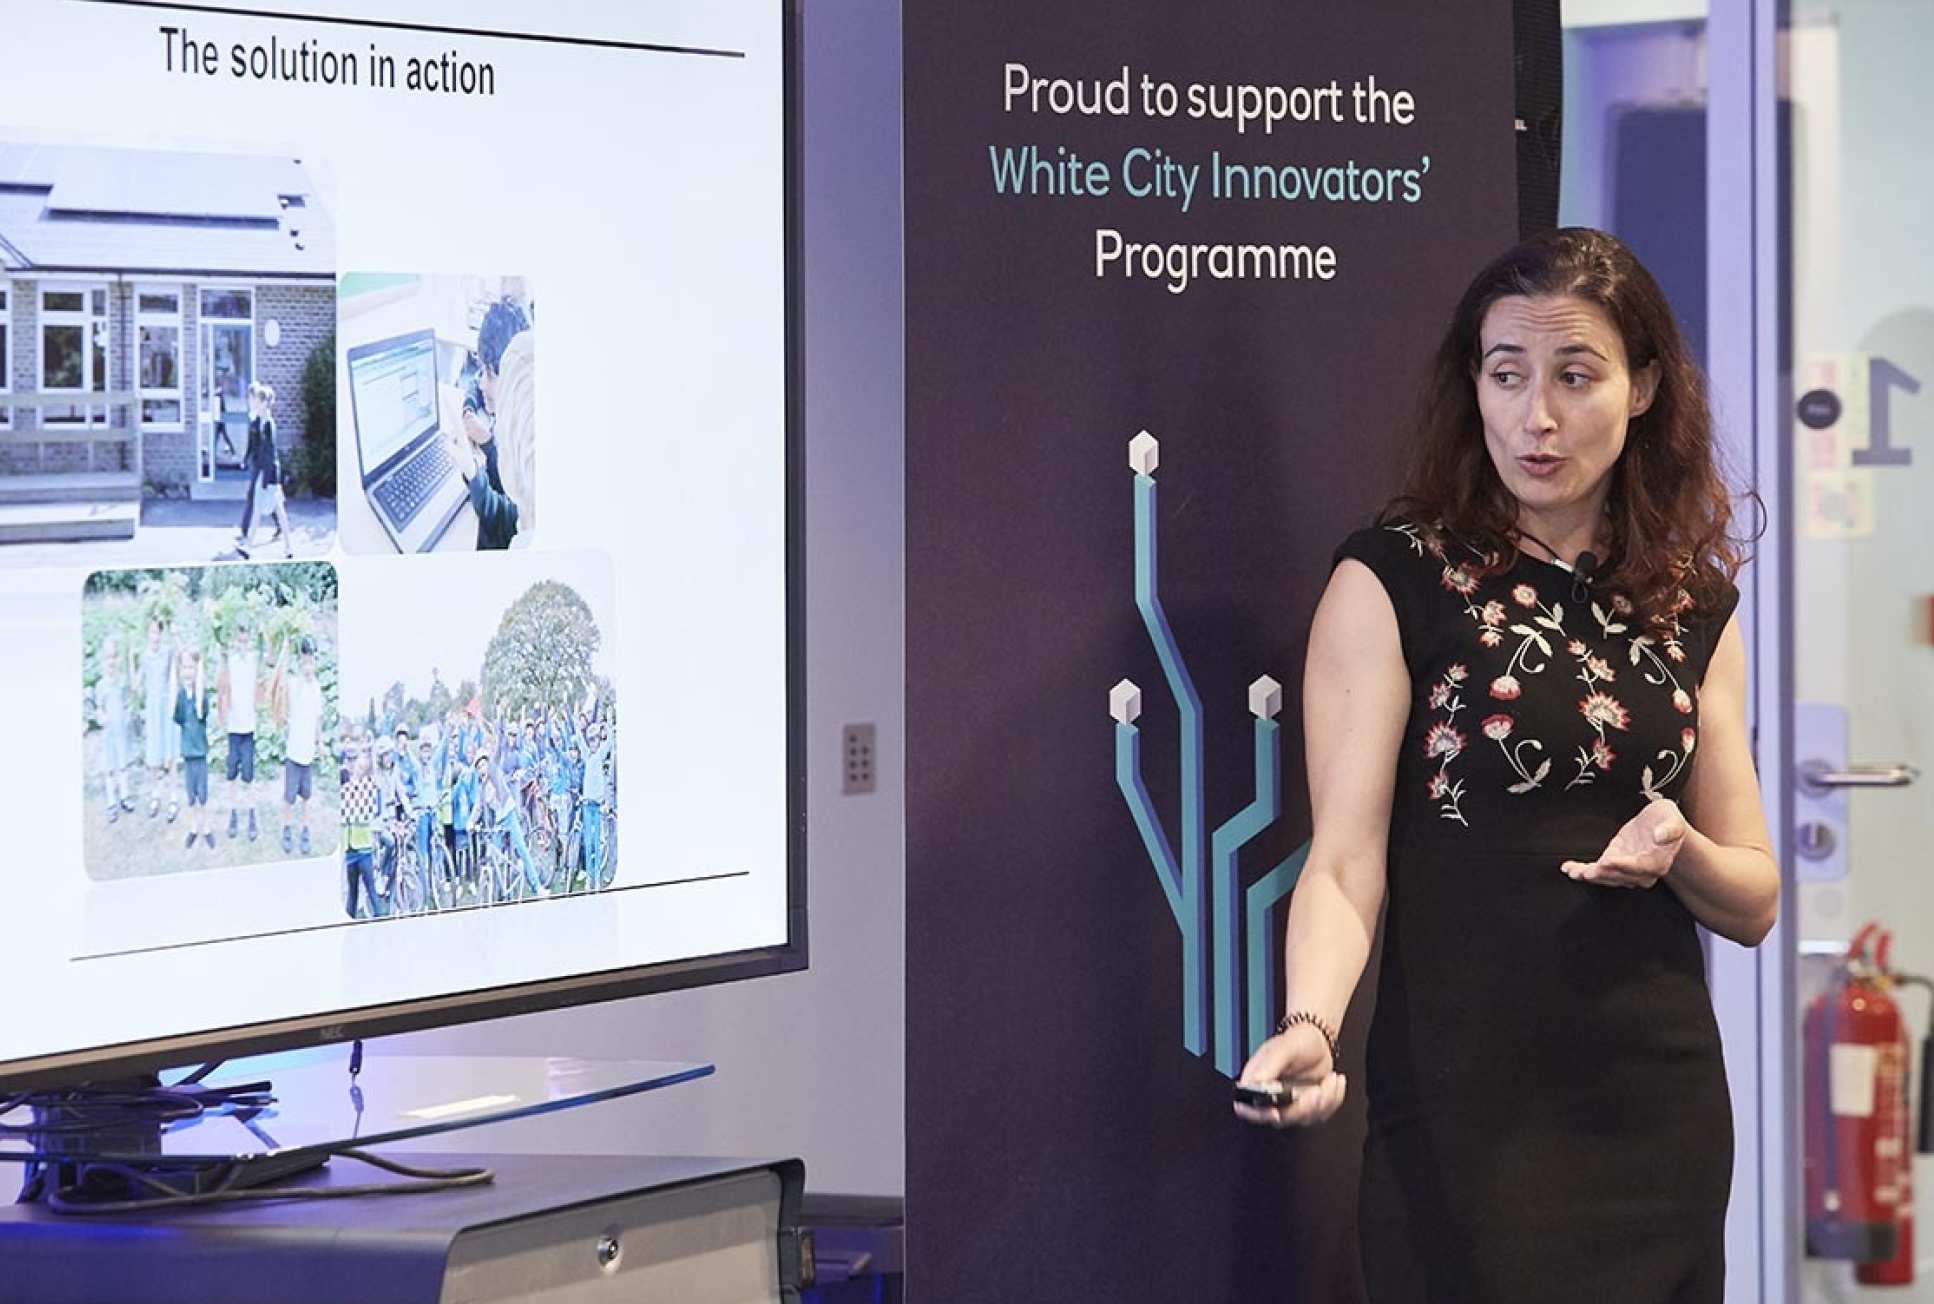 Founder Vasiliki Kioupi pitching as part of the White City Innovators’ Programme earlier this year